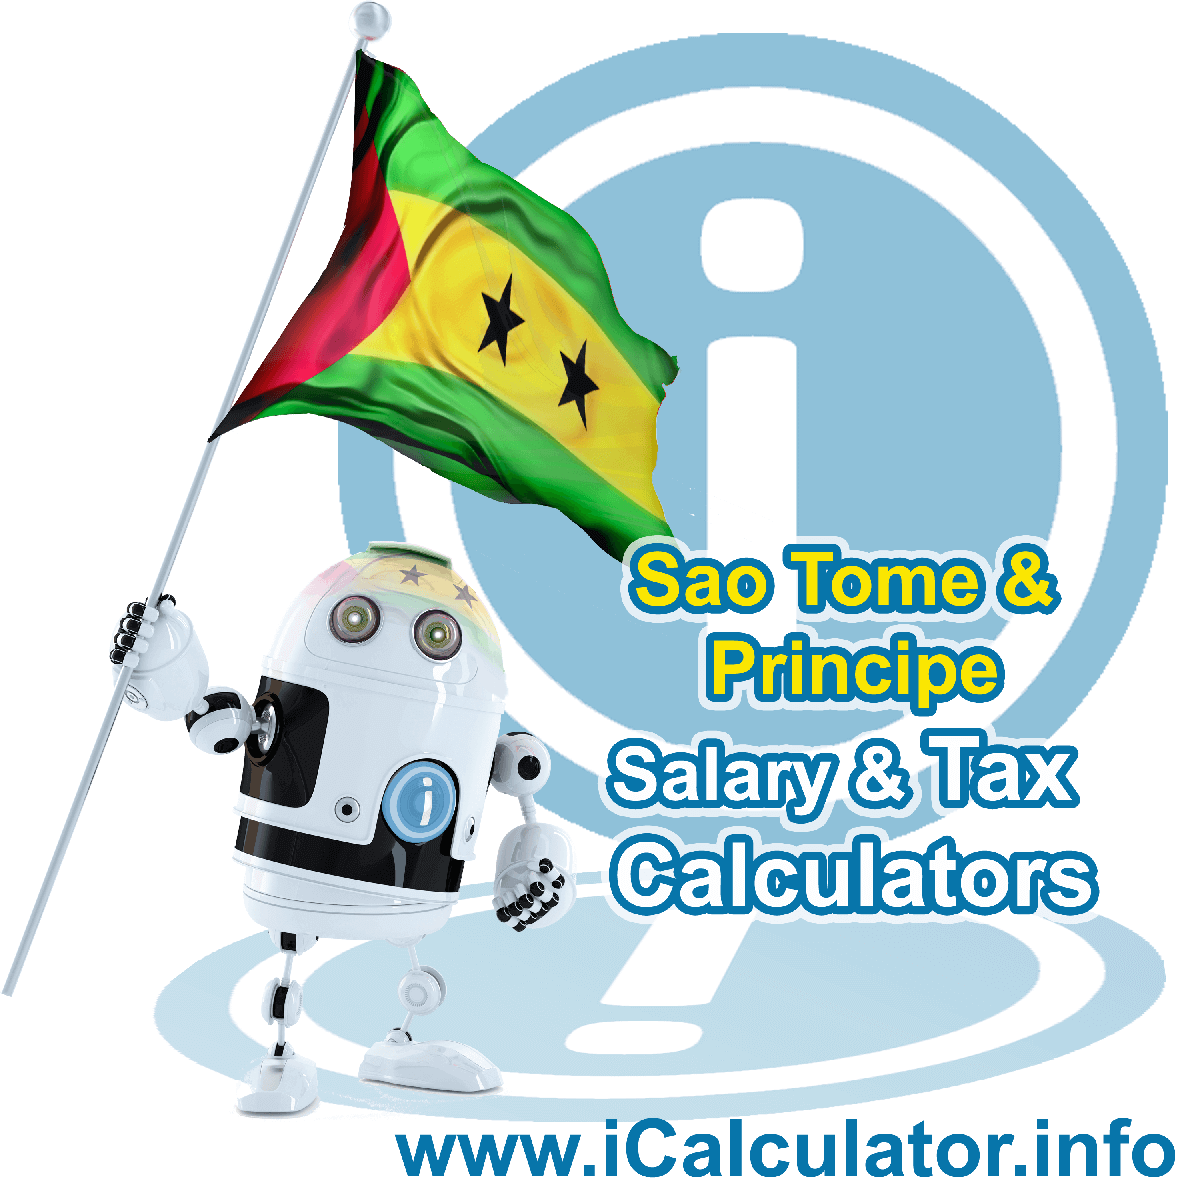 Sao Tome And Principe Tax Calculator. This image shows the Sao Tome And Principe flag and information relating to the tax formula for the Sao Tome And Principe Salary Calculator